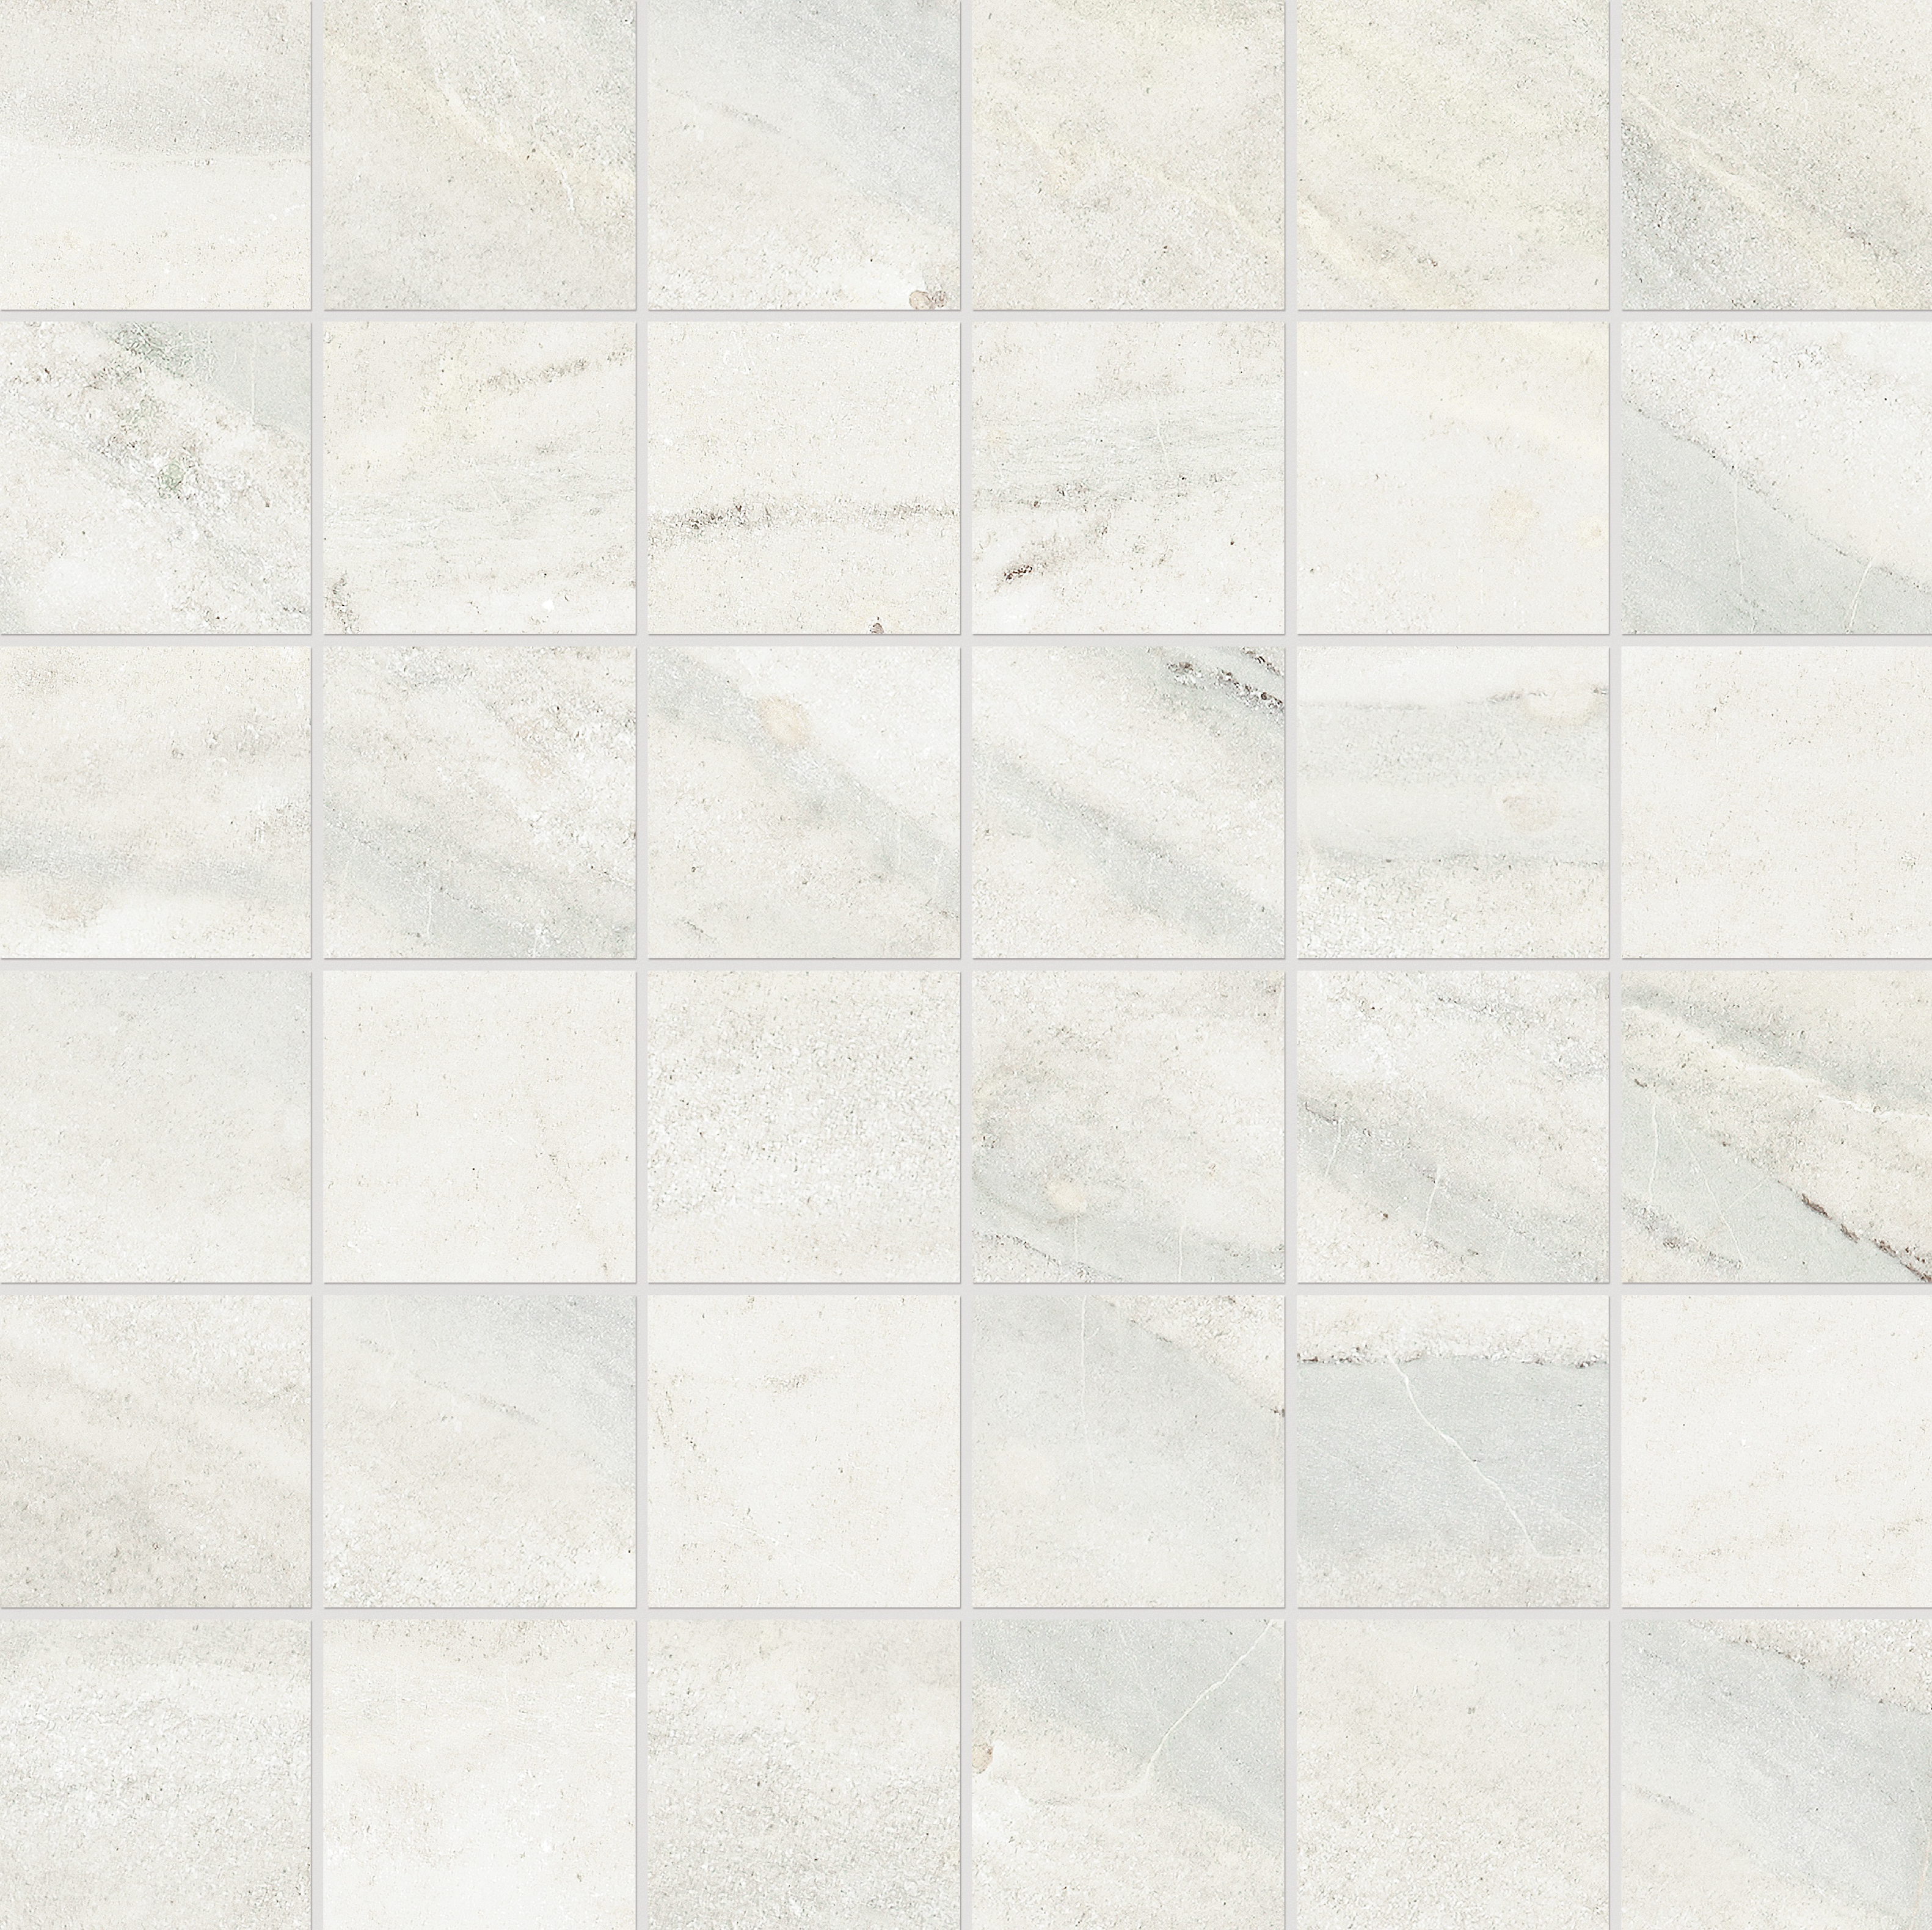 ice straight stack 2x2-inch pattern glazed porcelain mosaic from evolution anatolia collection distributed by surface group international matte finish straight edge edge mesh shape